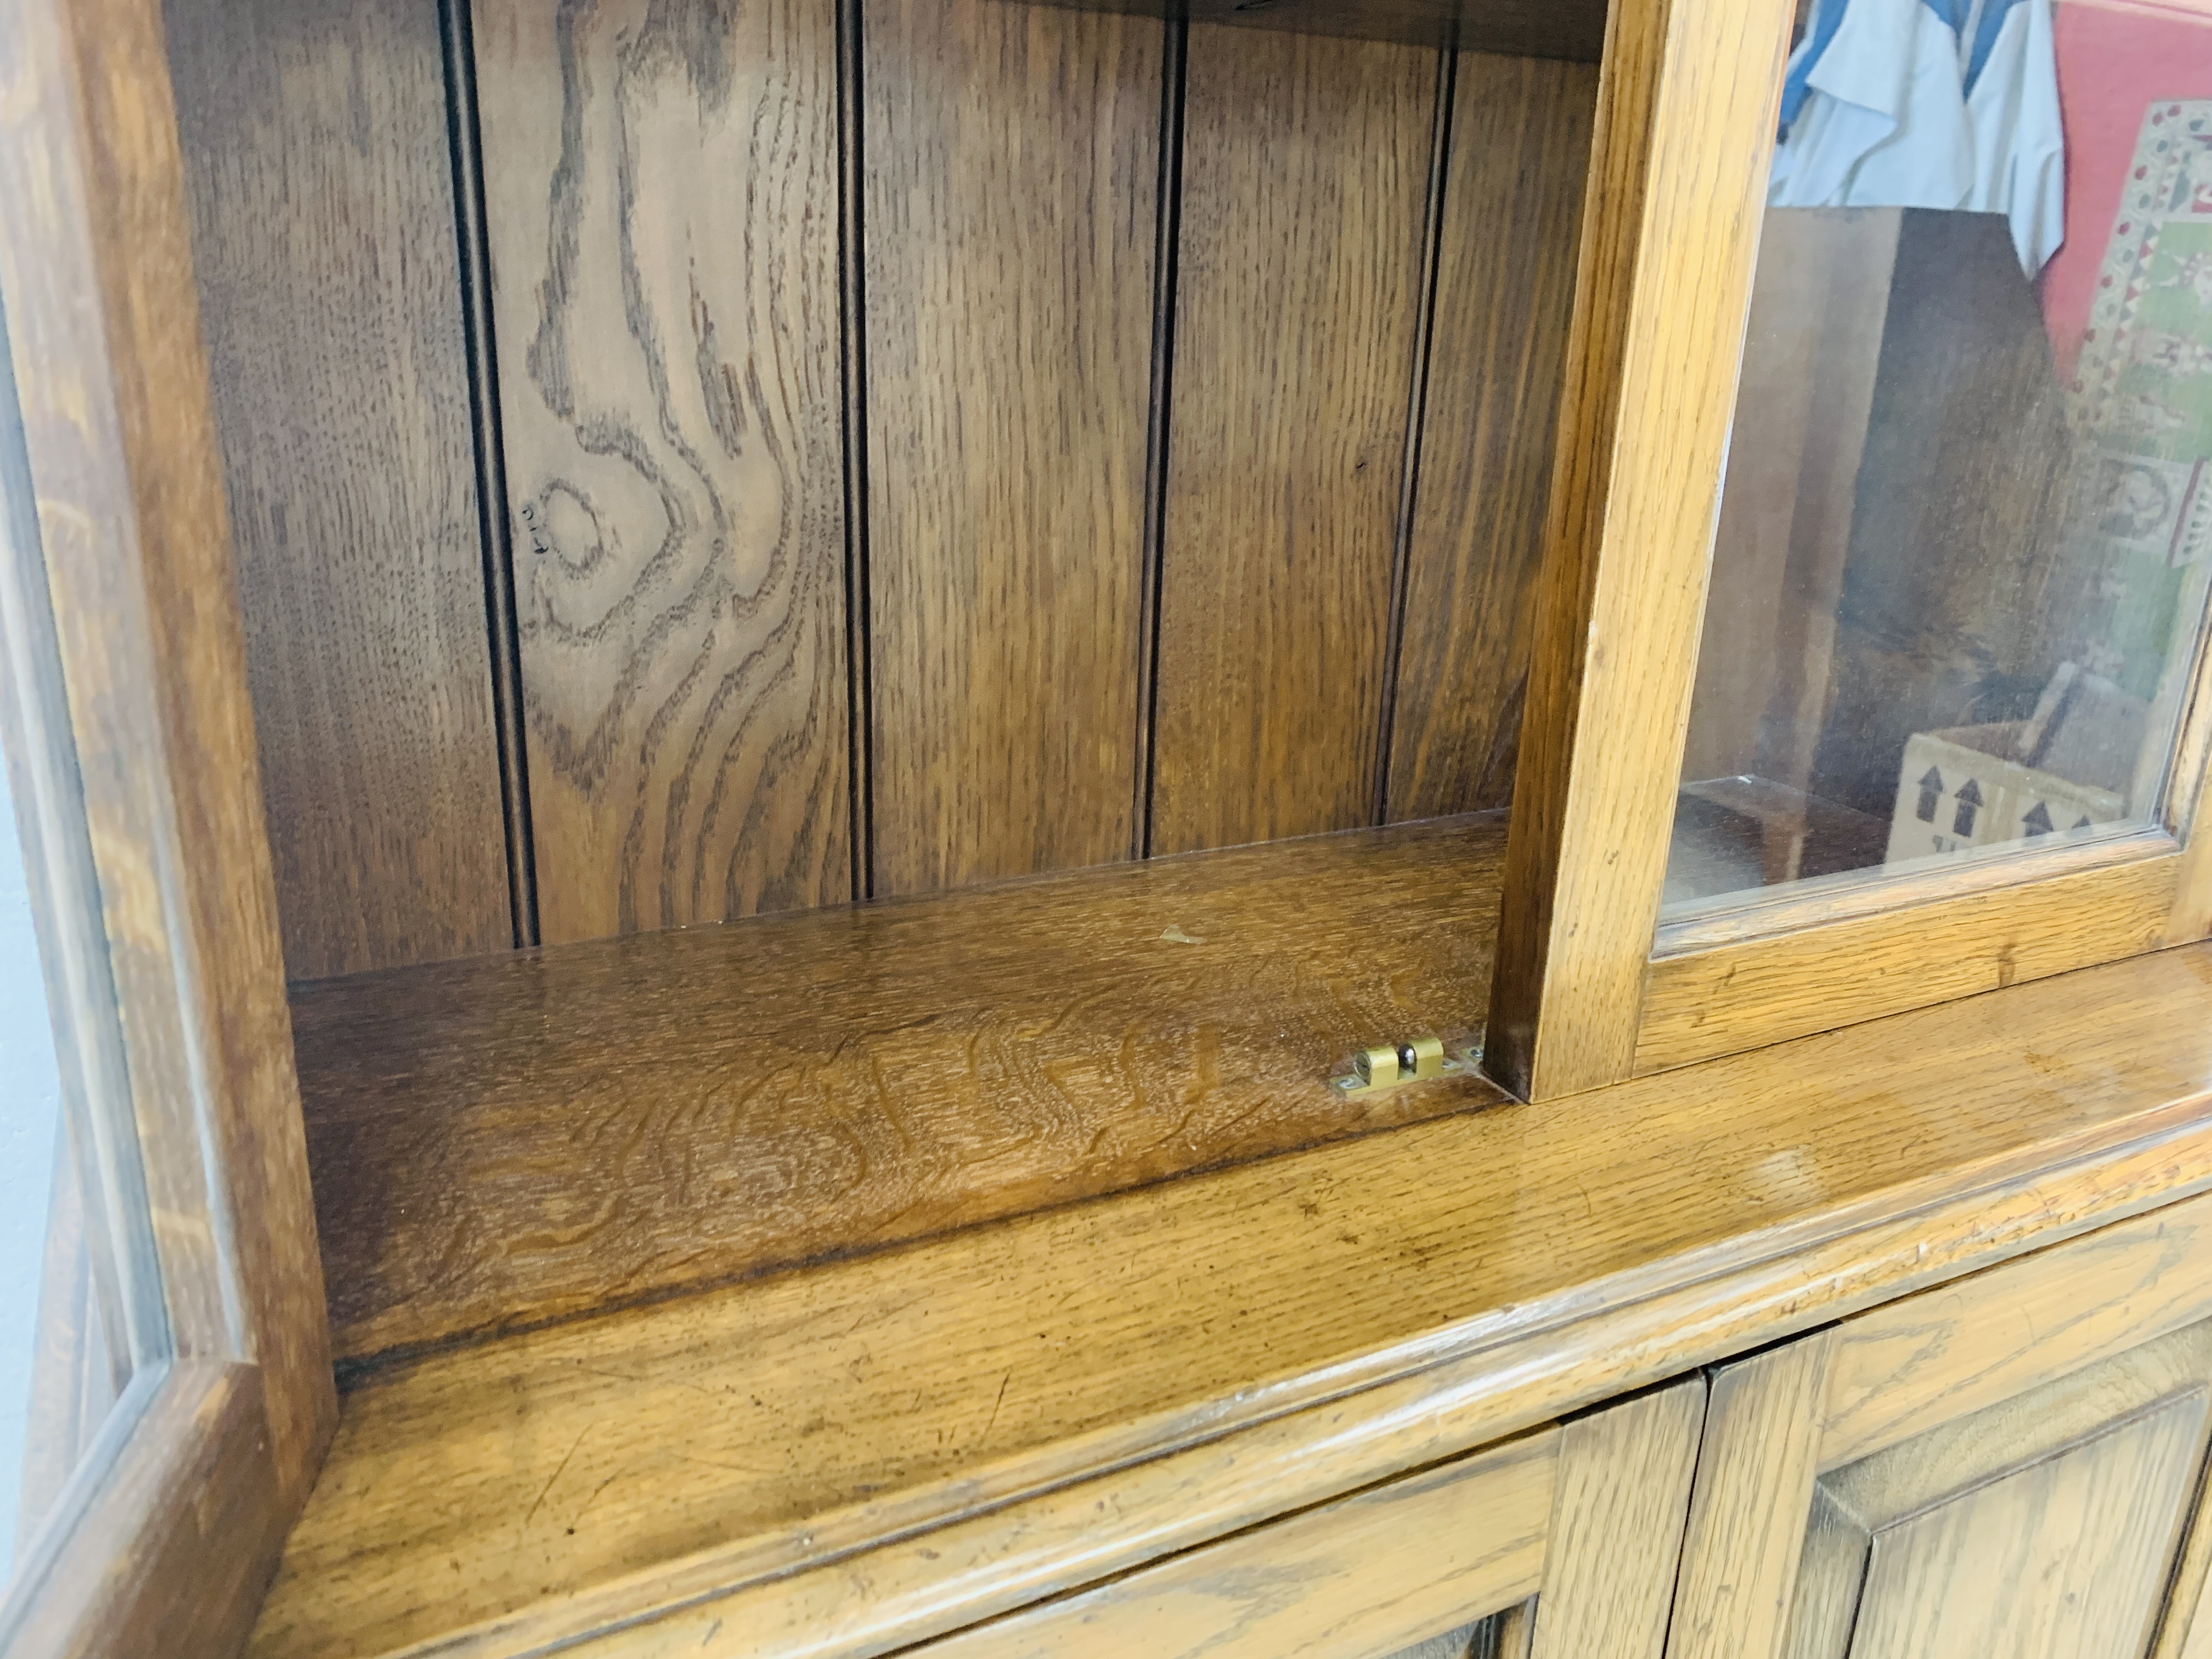 A QUALITY REPRODUCTION OAK BOOKCASE WITH CUPBOARD BASE BY DAVID NOTTAGE CABINET MAKER - W 75cm. - Image 11 of 14